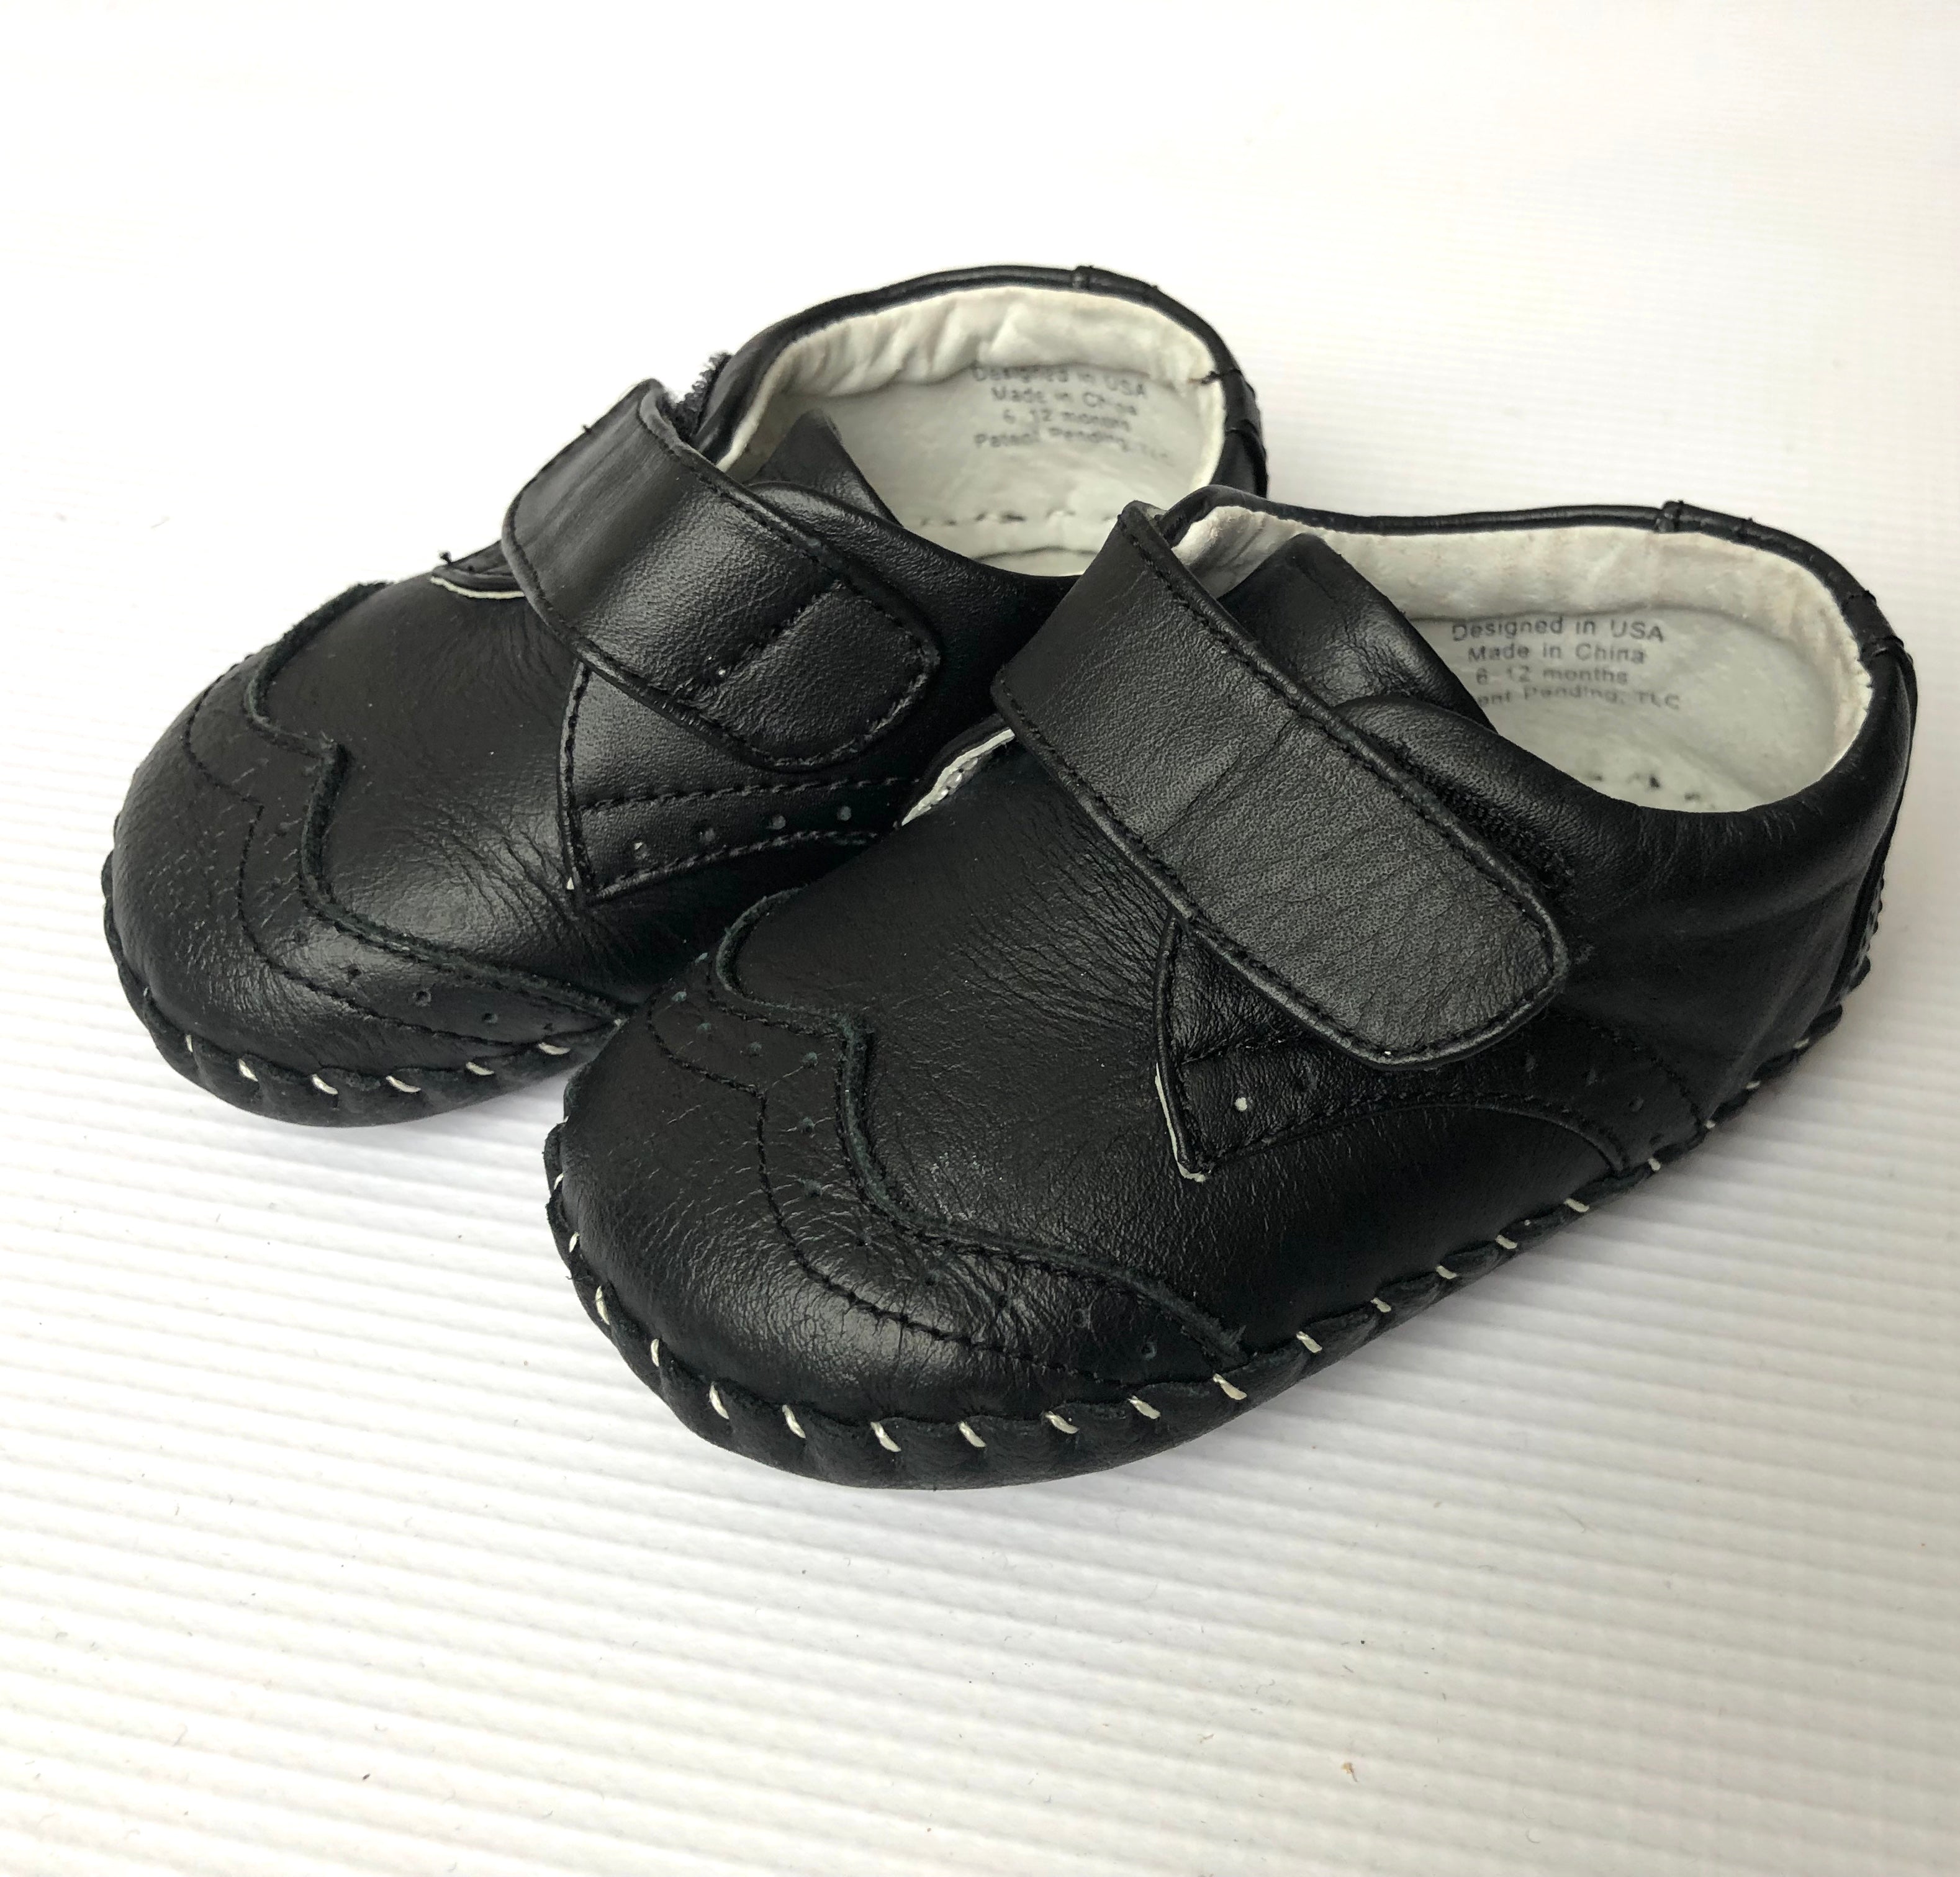 pediped baby shoes